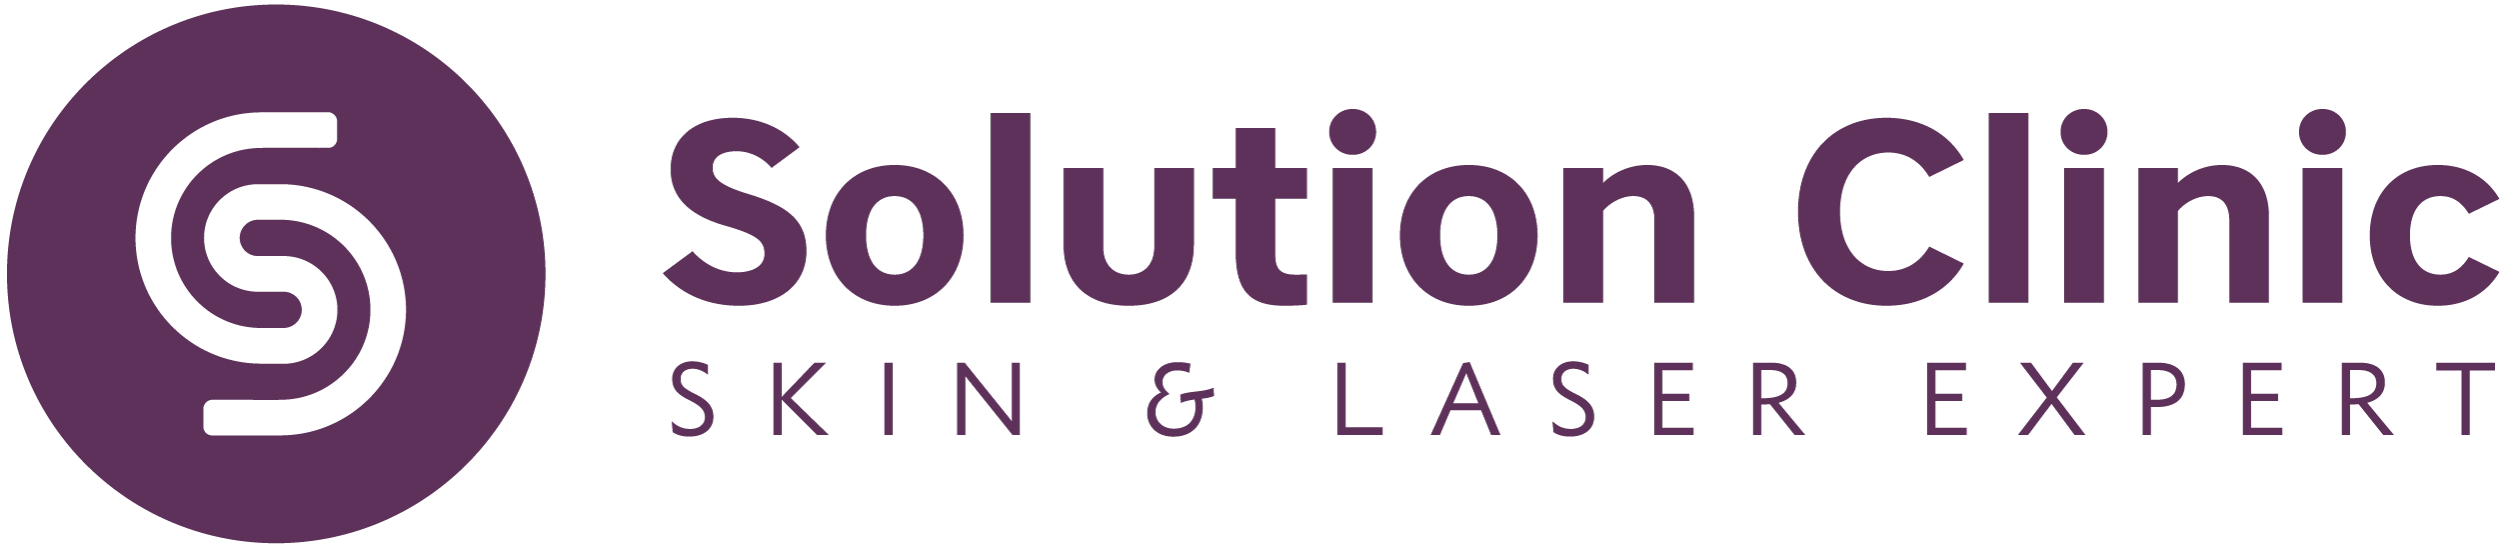 Solution Clinic